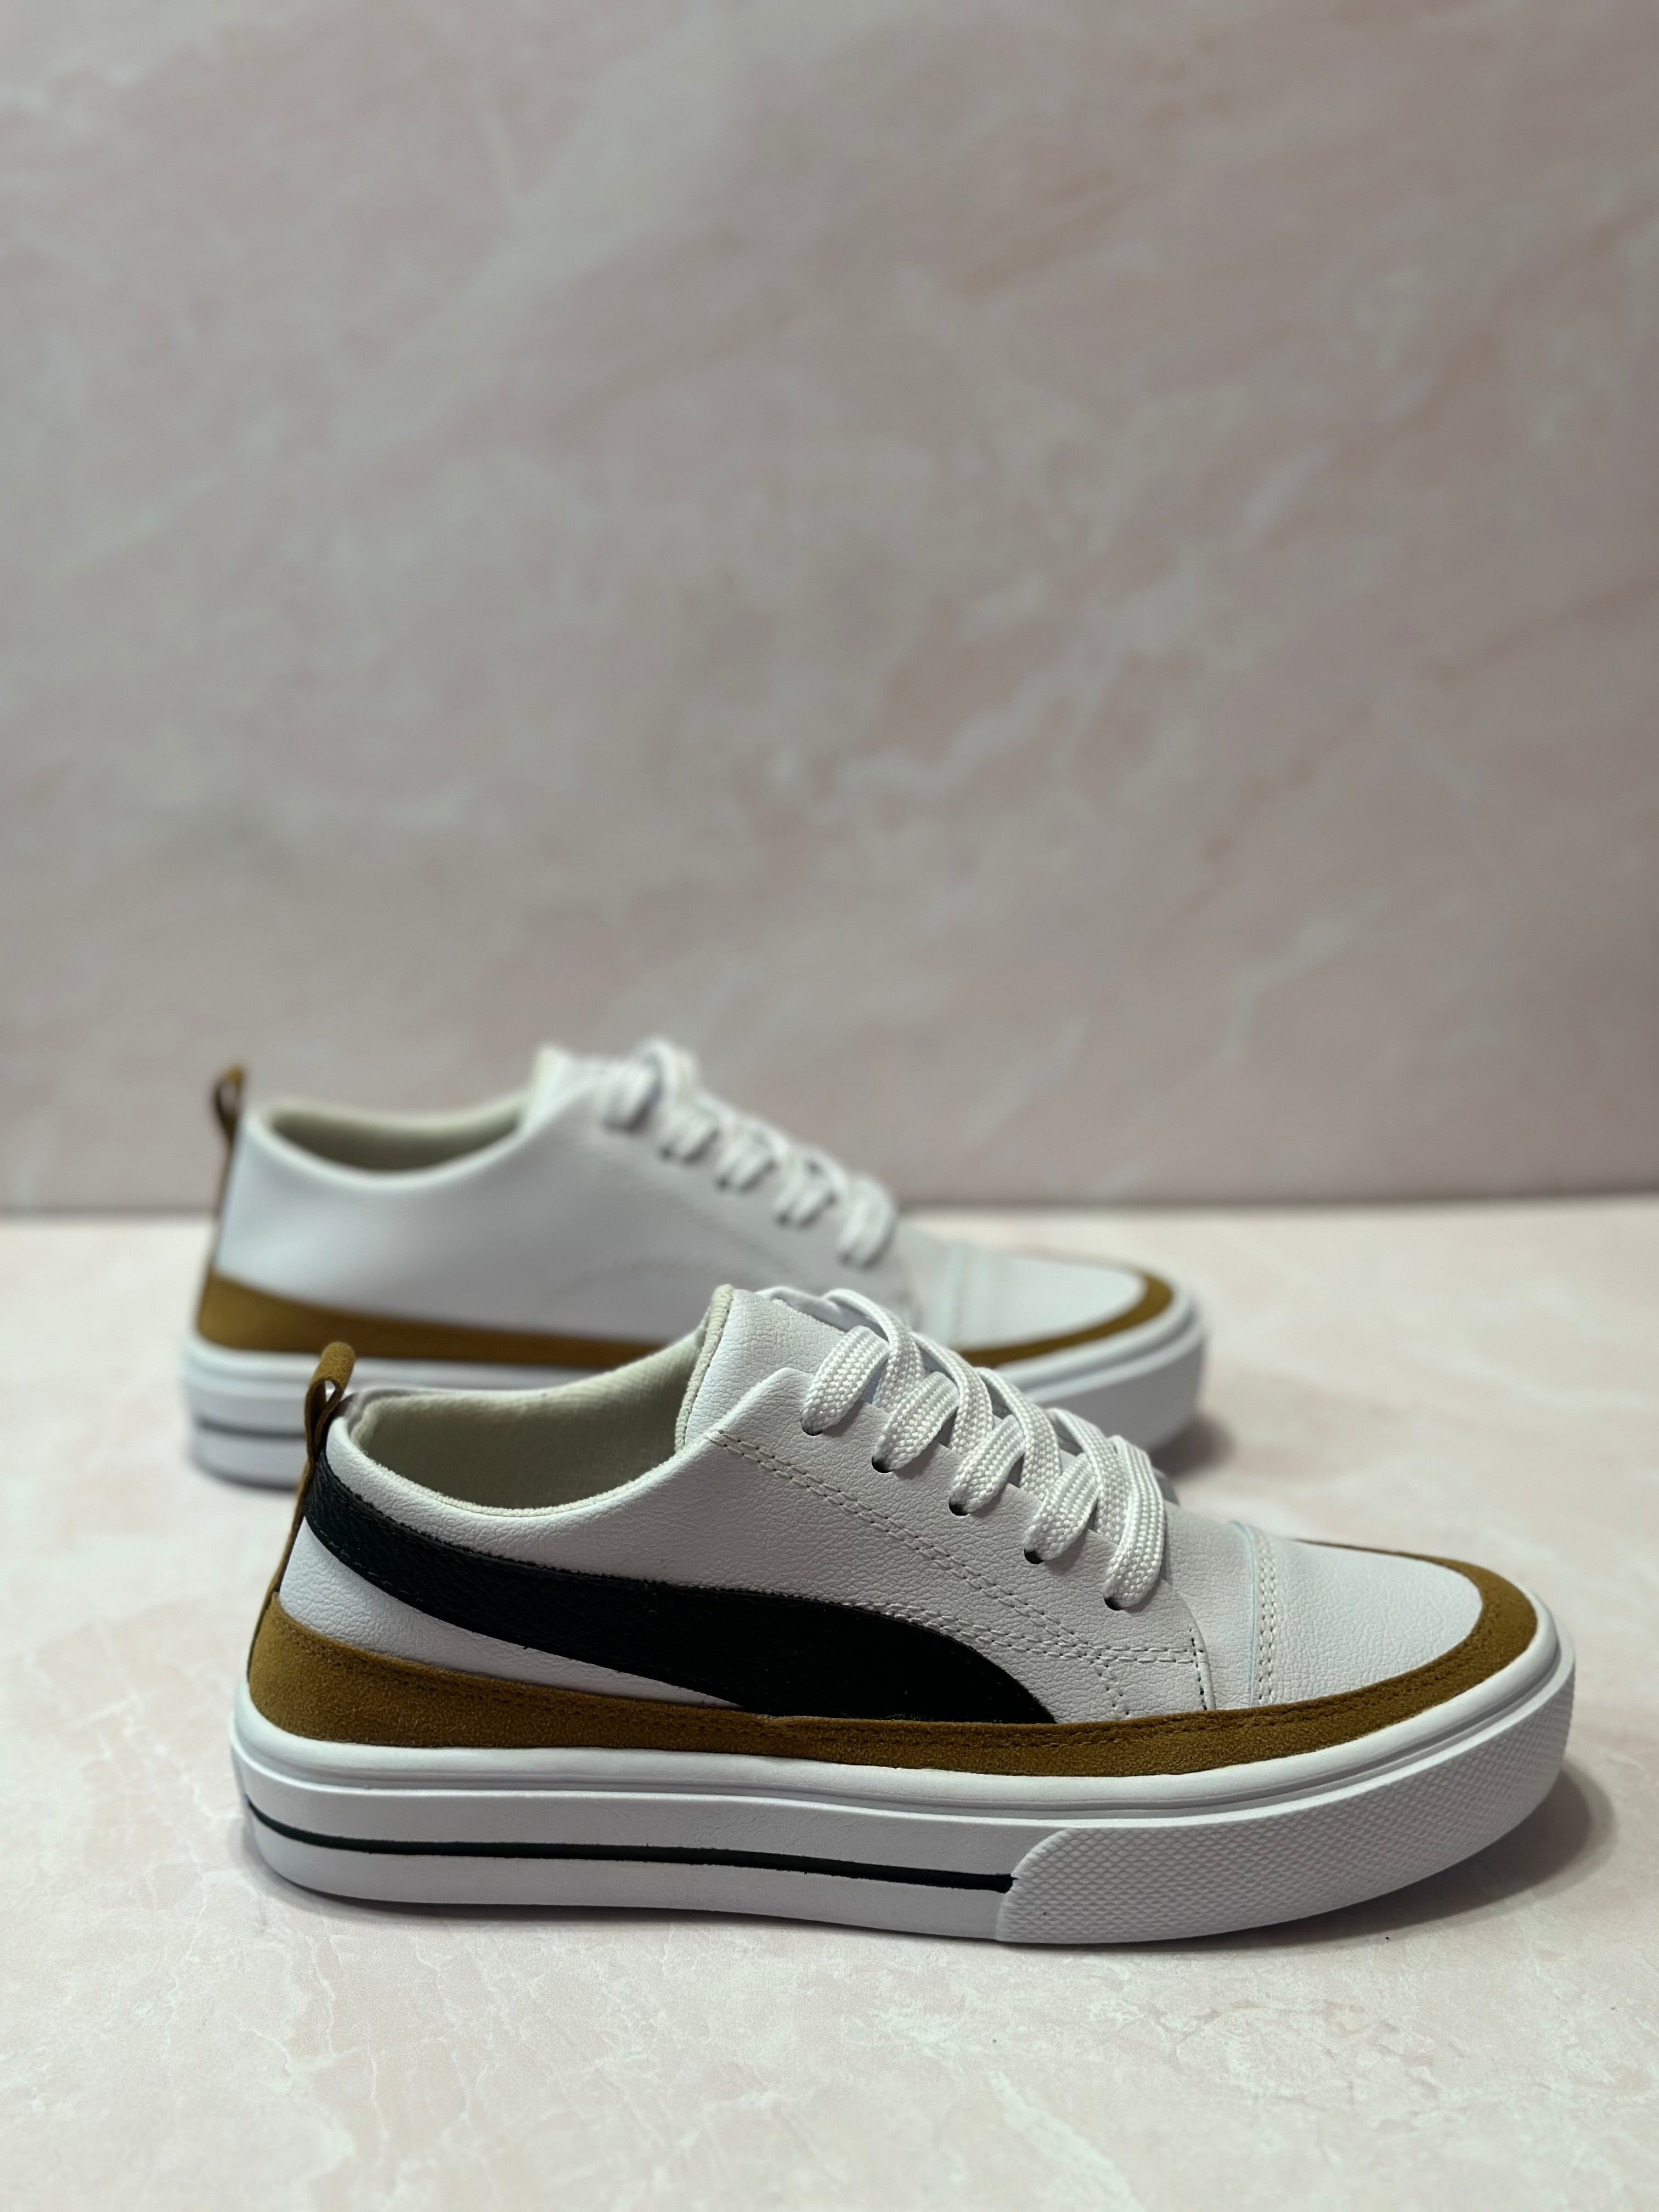 BLACK AND TAN SNEAKERS BY BRITT AND BELLE BOUTIQUE